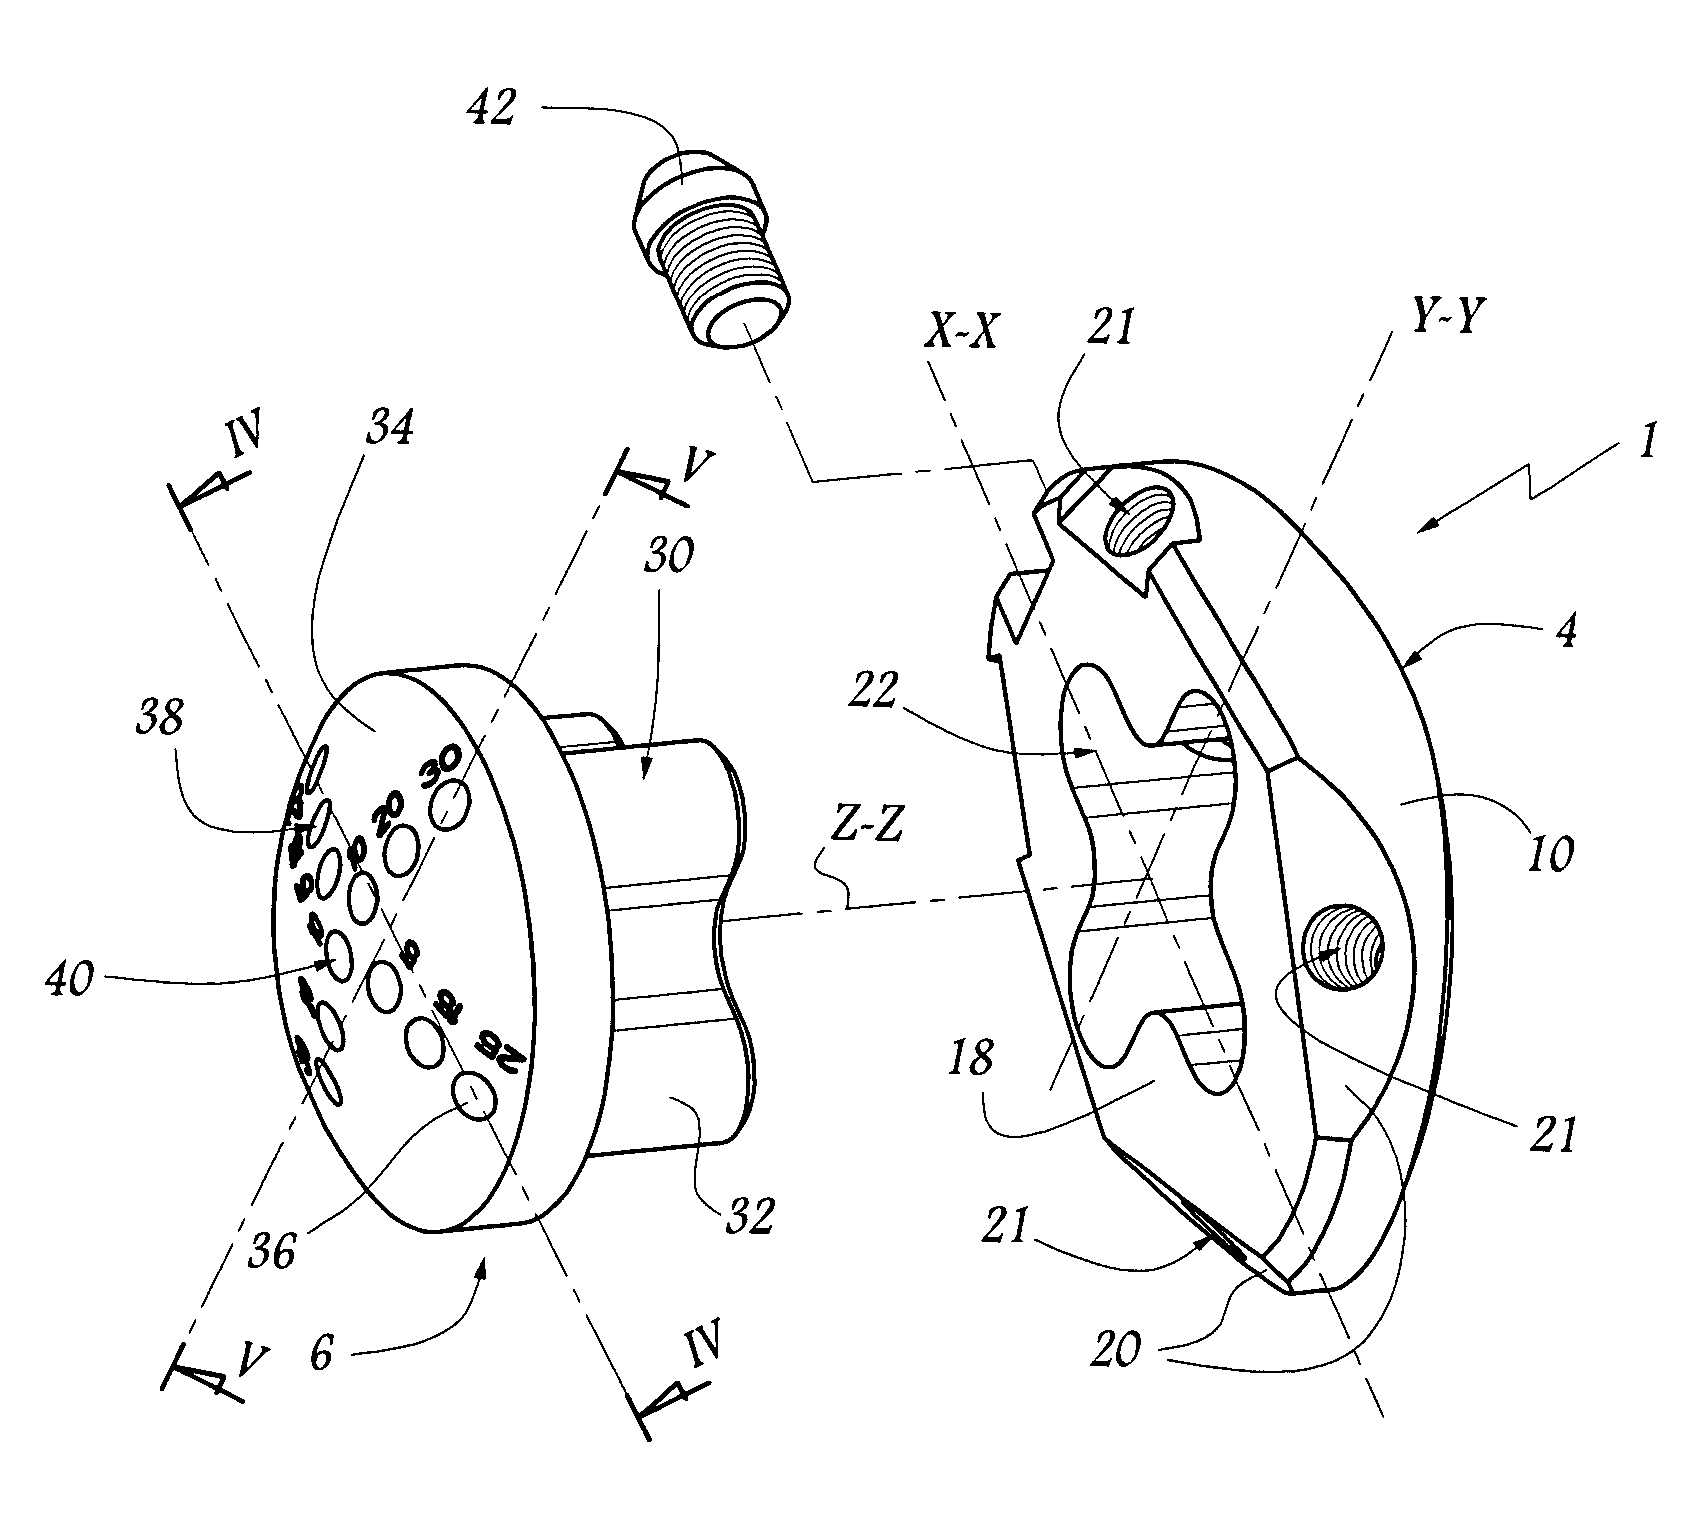 Ancillary tool for positioning a glenoid implant